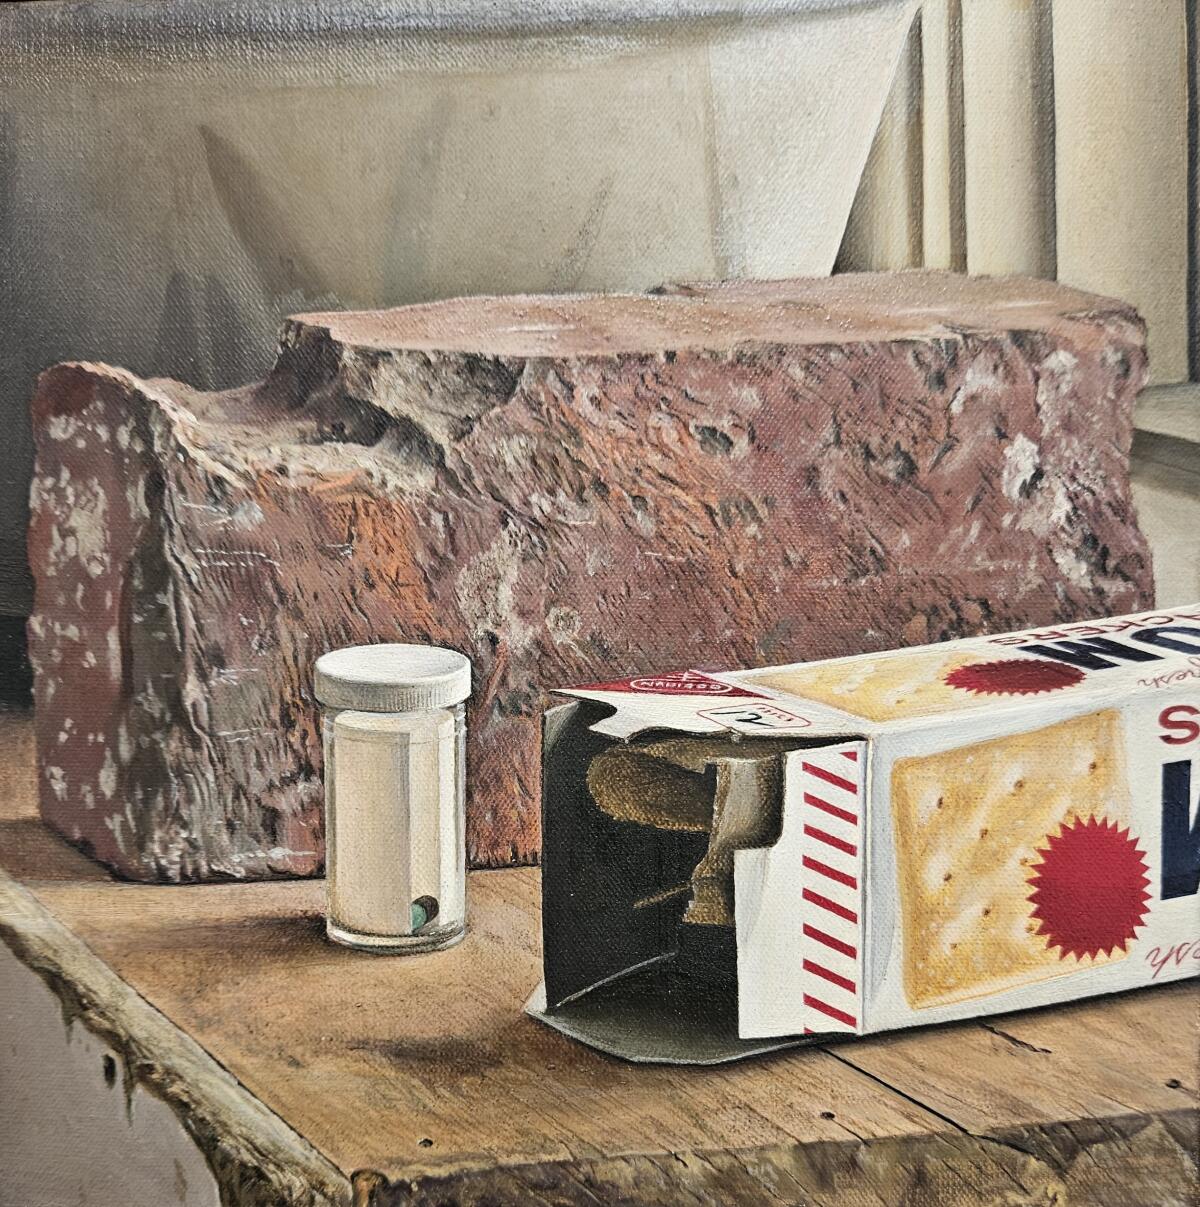 An oil painting of a box of crackers, a clear pill case with a single pill, a chipped red brick and a decorated bowl.